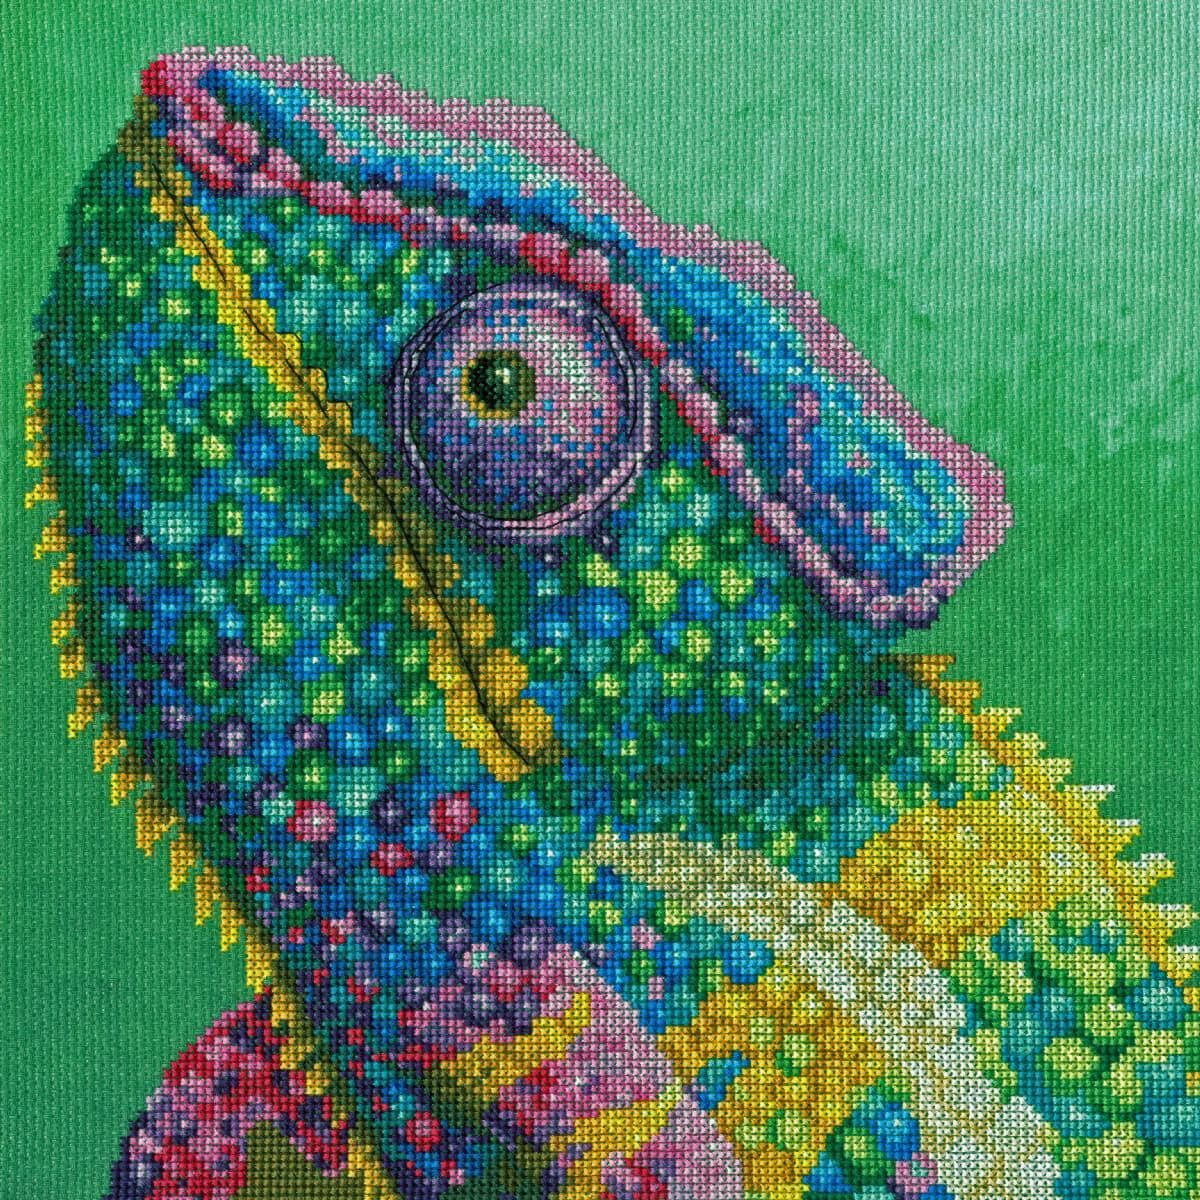 A close-up, colorful, pixelated image of a chameleons...